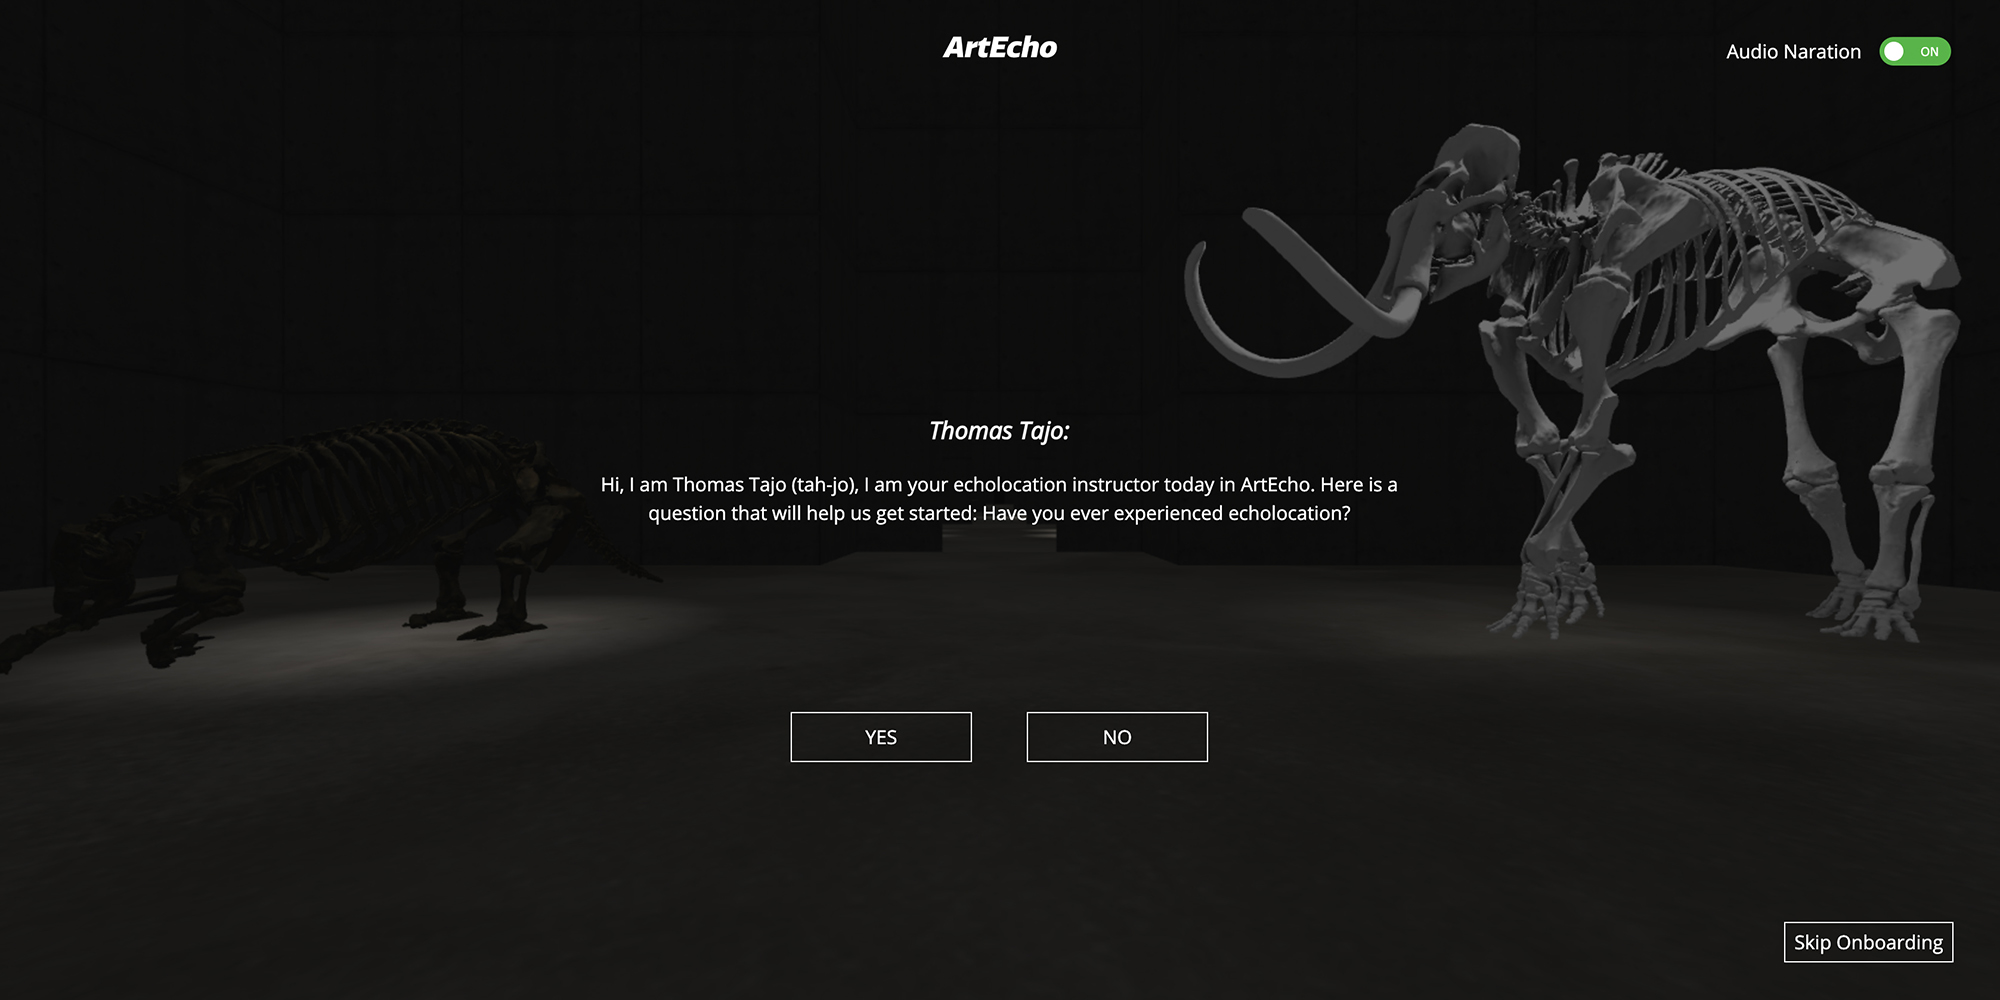 A virtual space with dinosaur skeletons on display, with text reading "Thomas Tajo: Hi, I am Thomas Tajo (tah-jo), I am your echolocation instructor today in ArtEcho. Here is a question that will help us get started: Have you ever experienced echolocation?